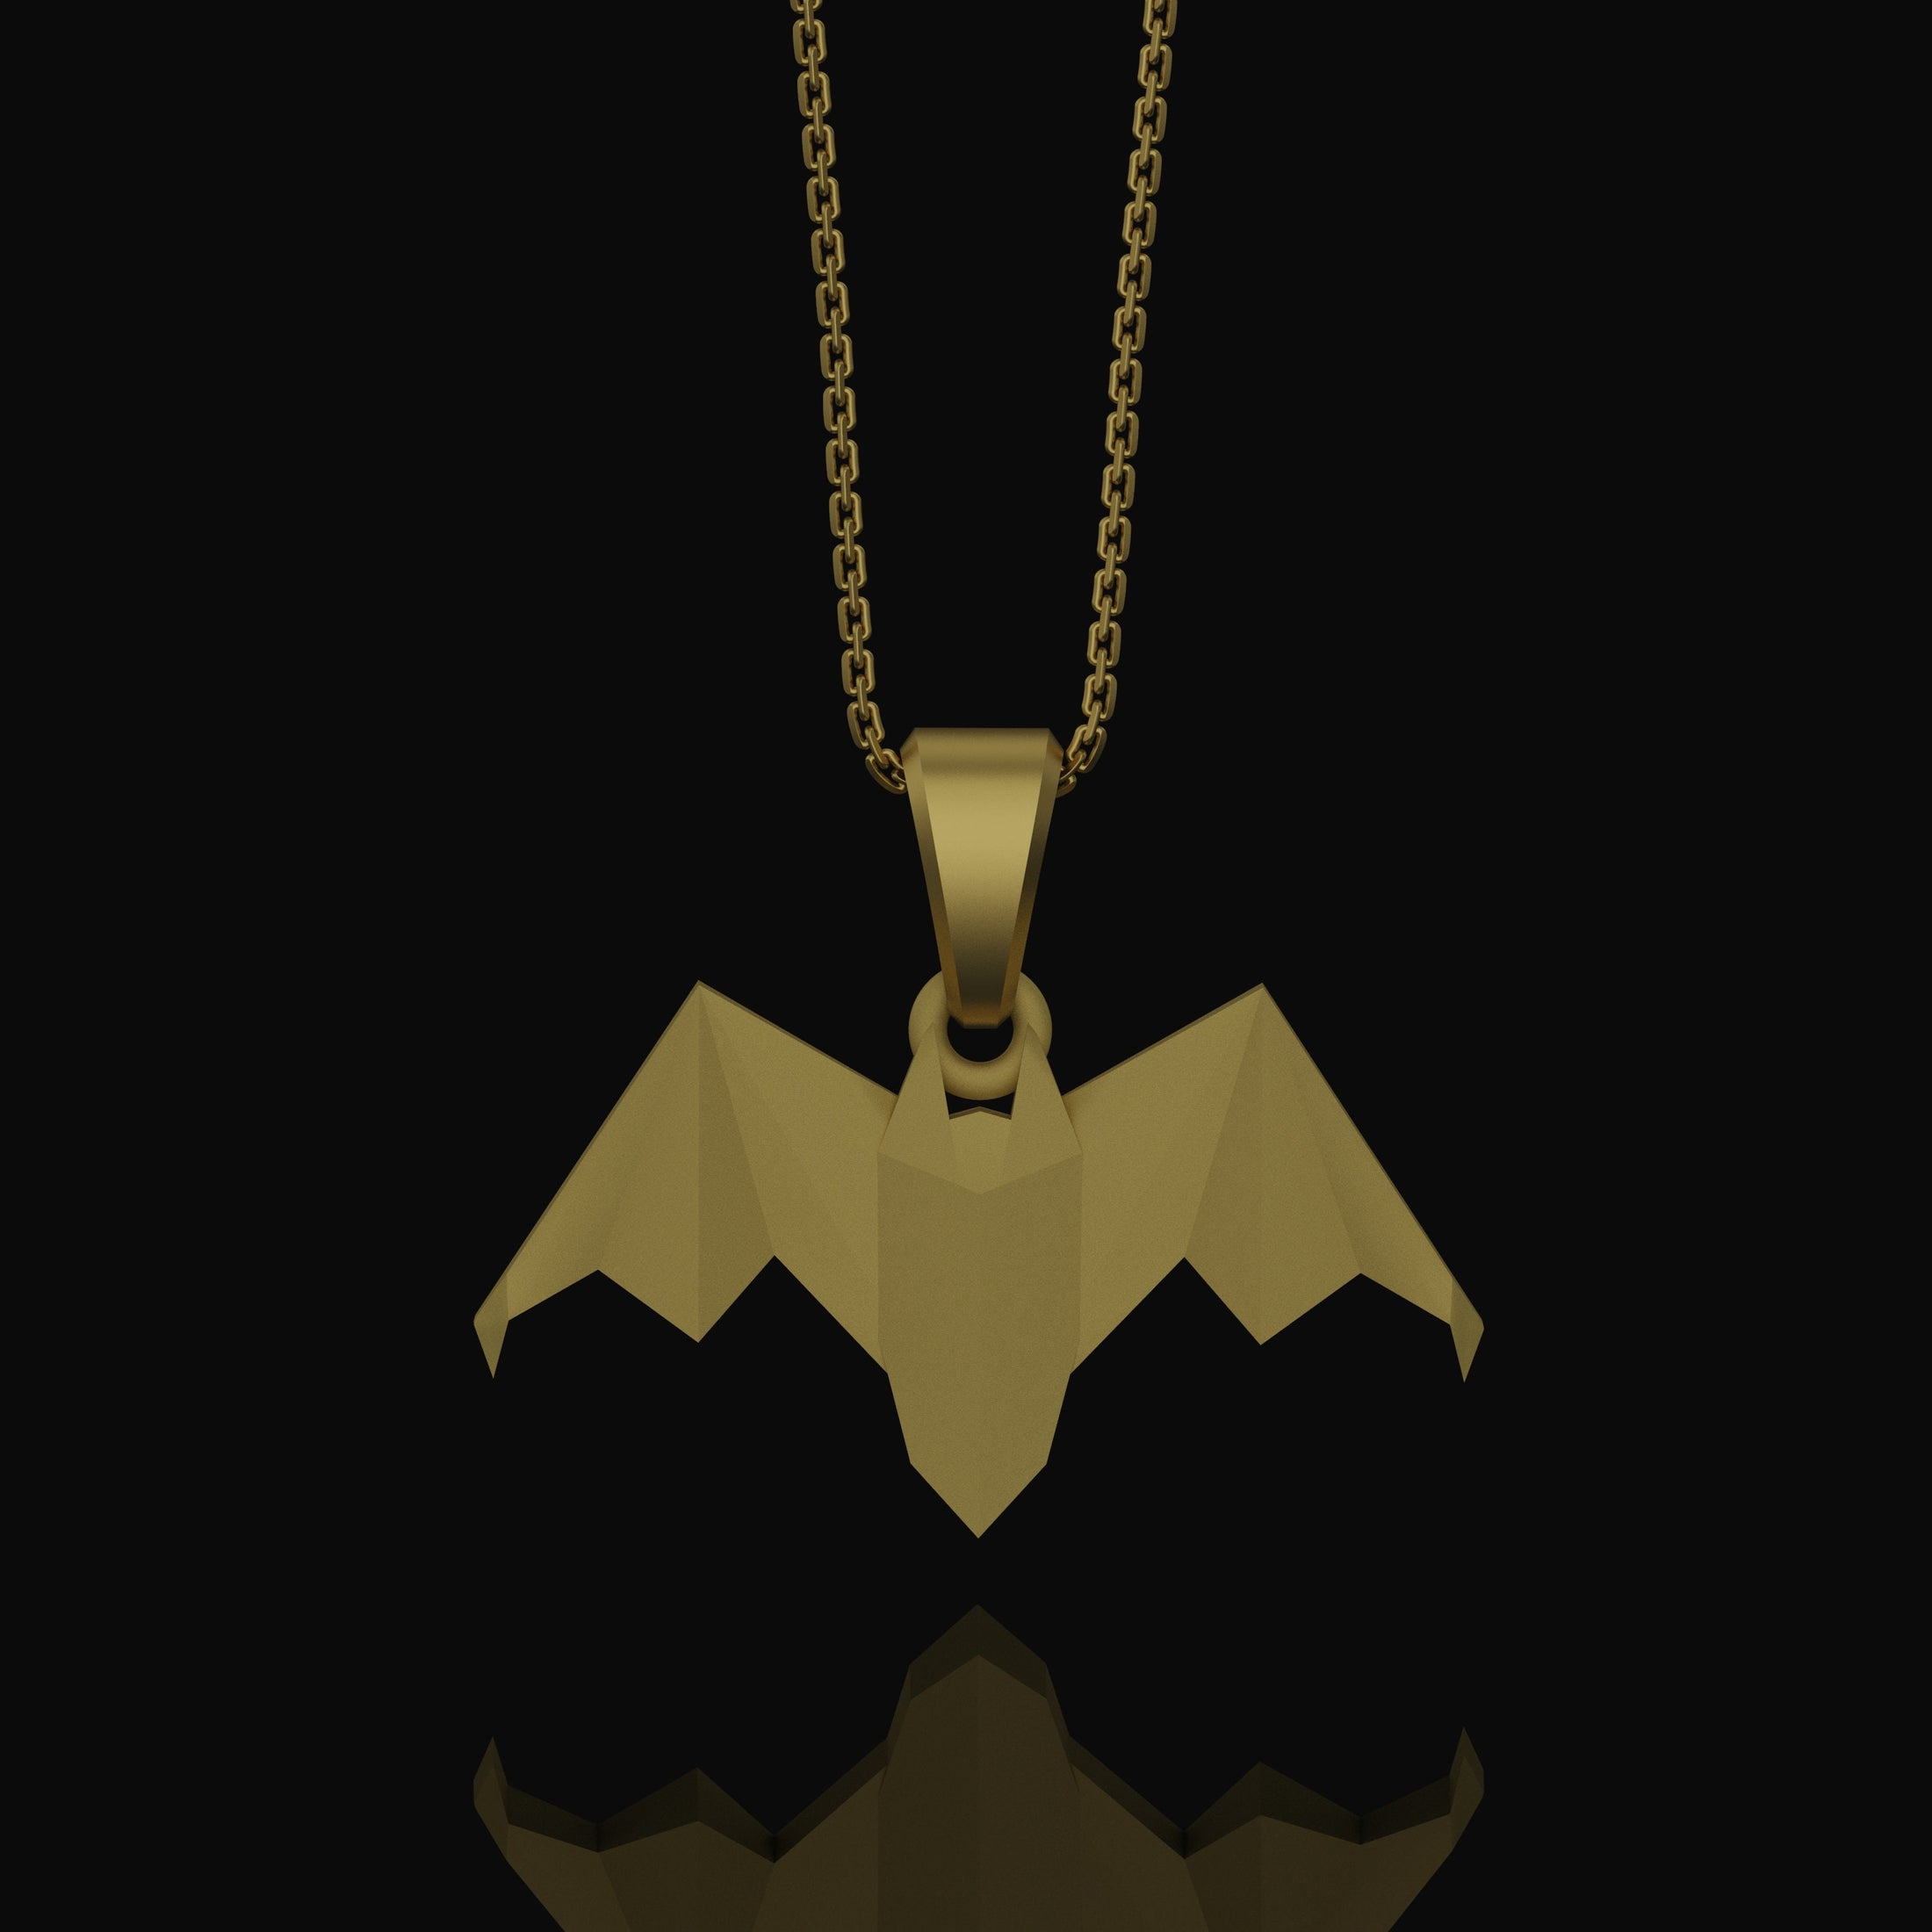 Silver Origami Bat Necklace - Unique Gothic Nocturnal Pendant, Elegant Folded Bat Charm, Perfect Dark Style Gift for Him